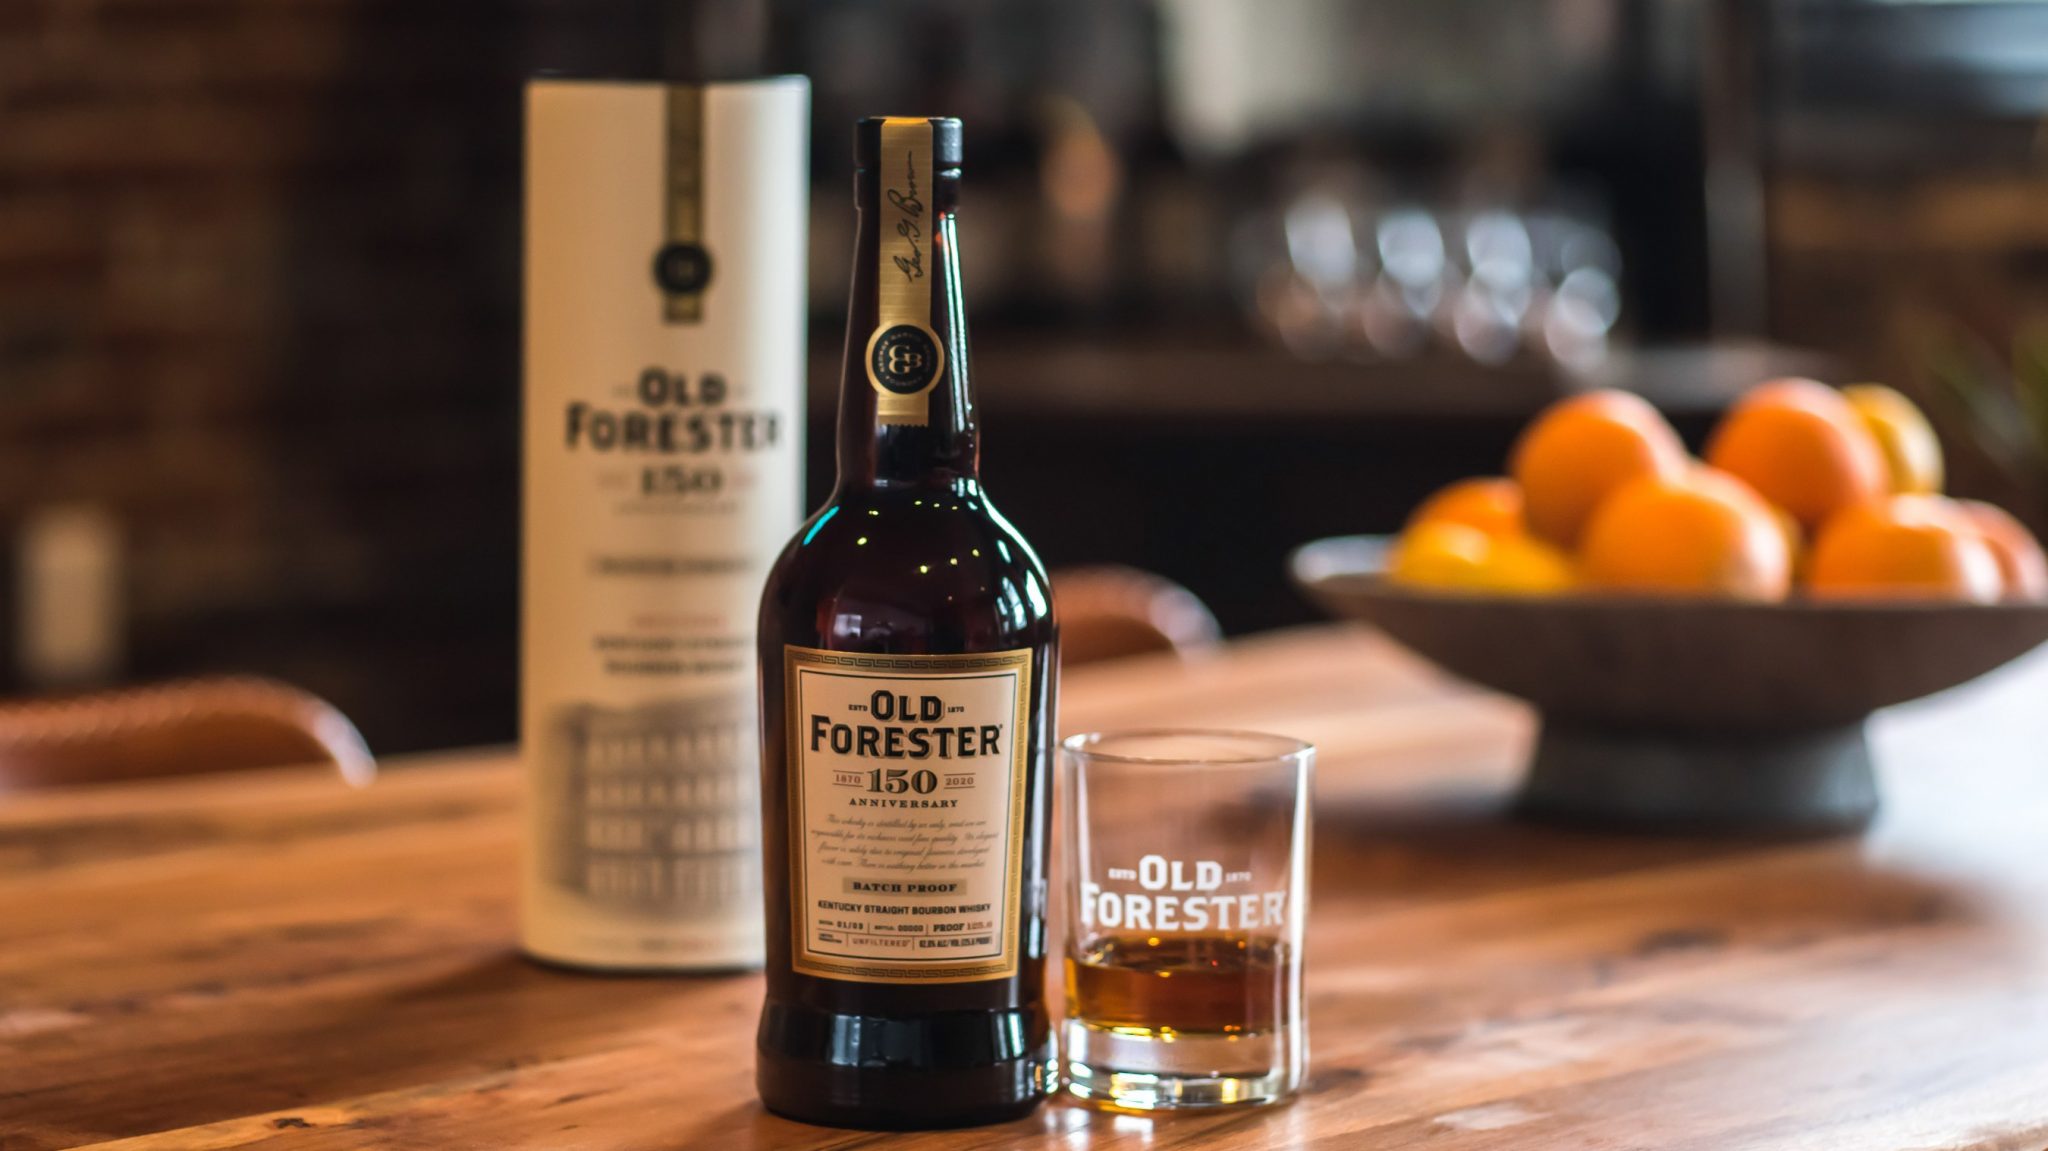 old-forester-celebrates-150th-anniversary-with-limited-edition-bourbon